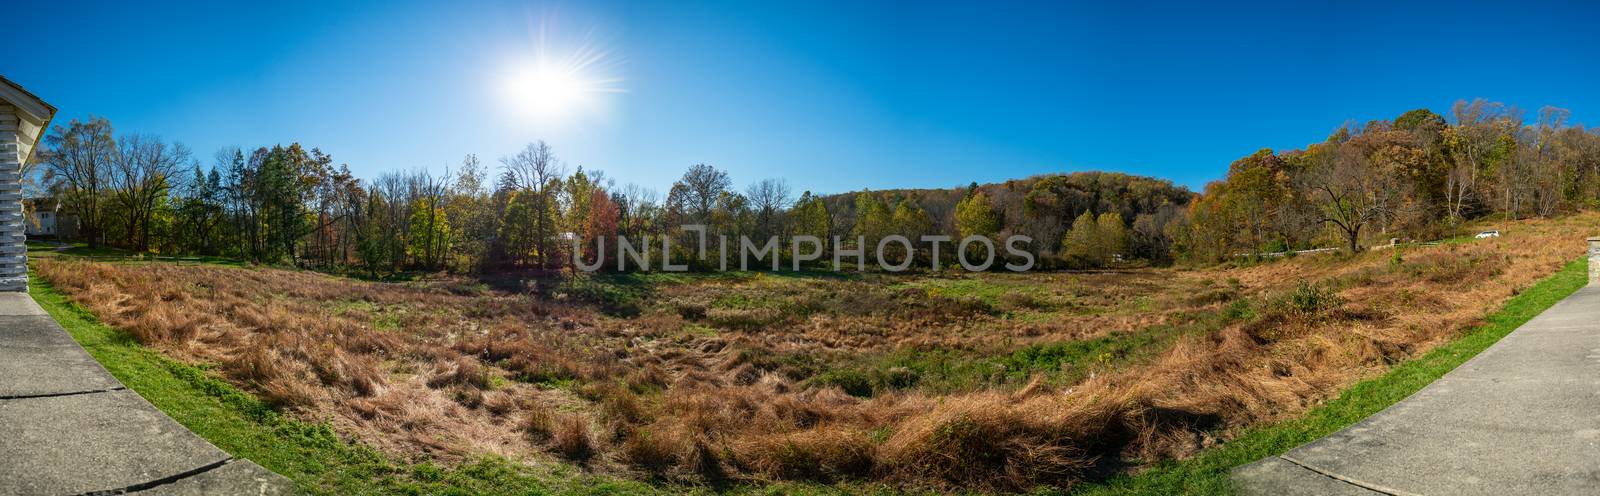 A Panoramic Shot of an Open Field With the Sun Behind Trees at V by bju12290